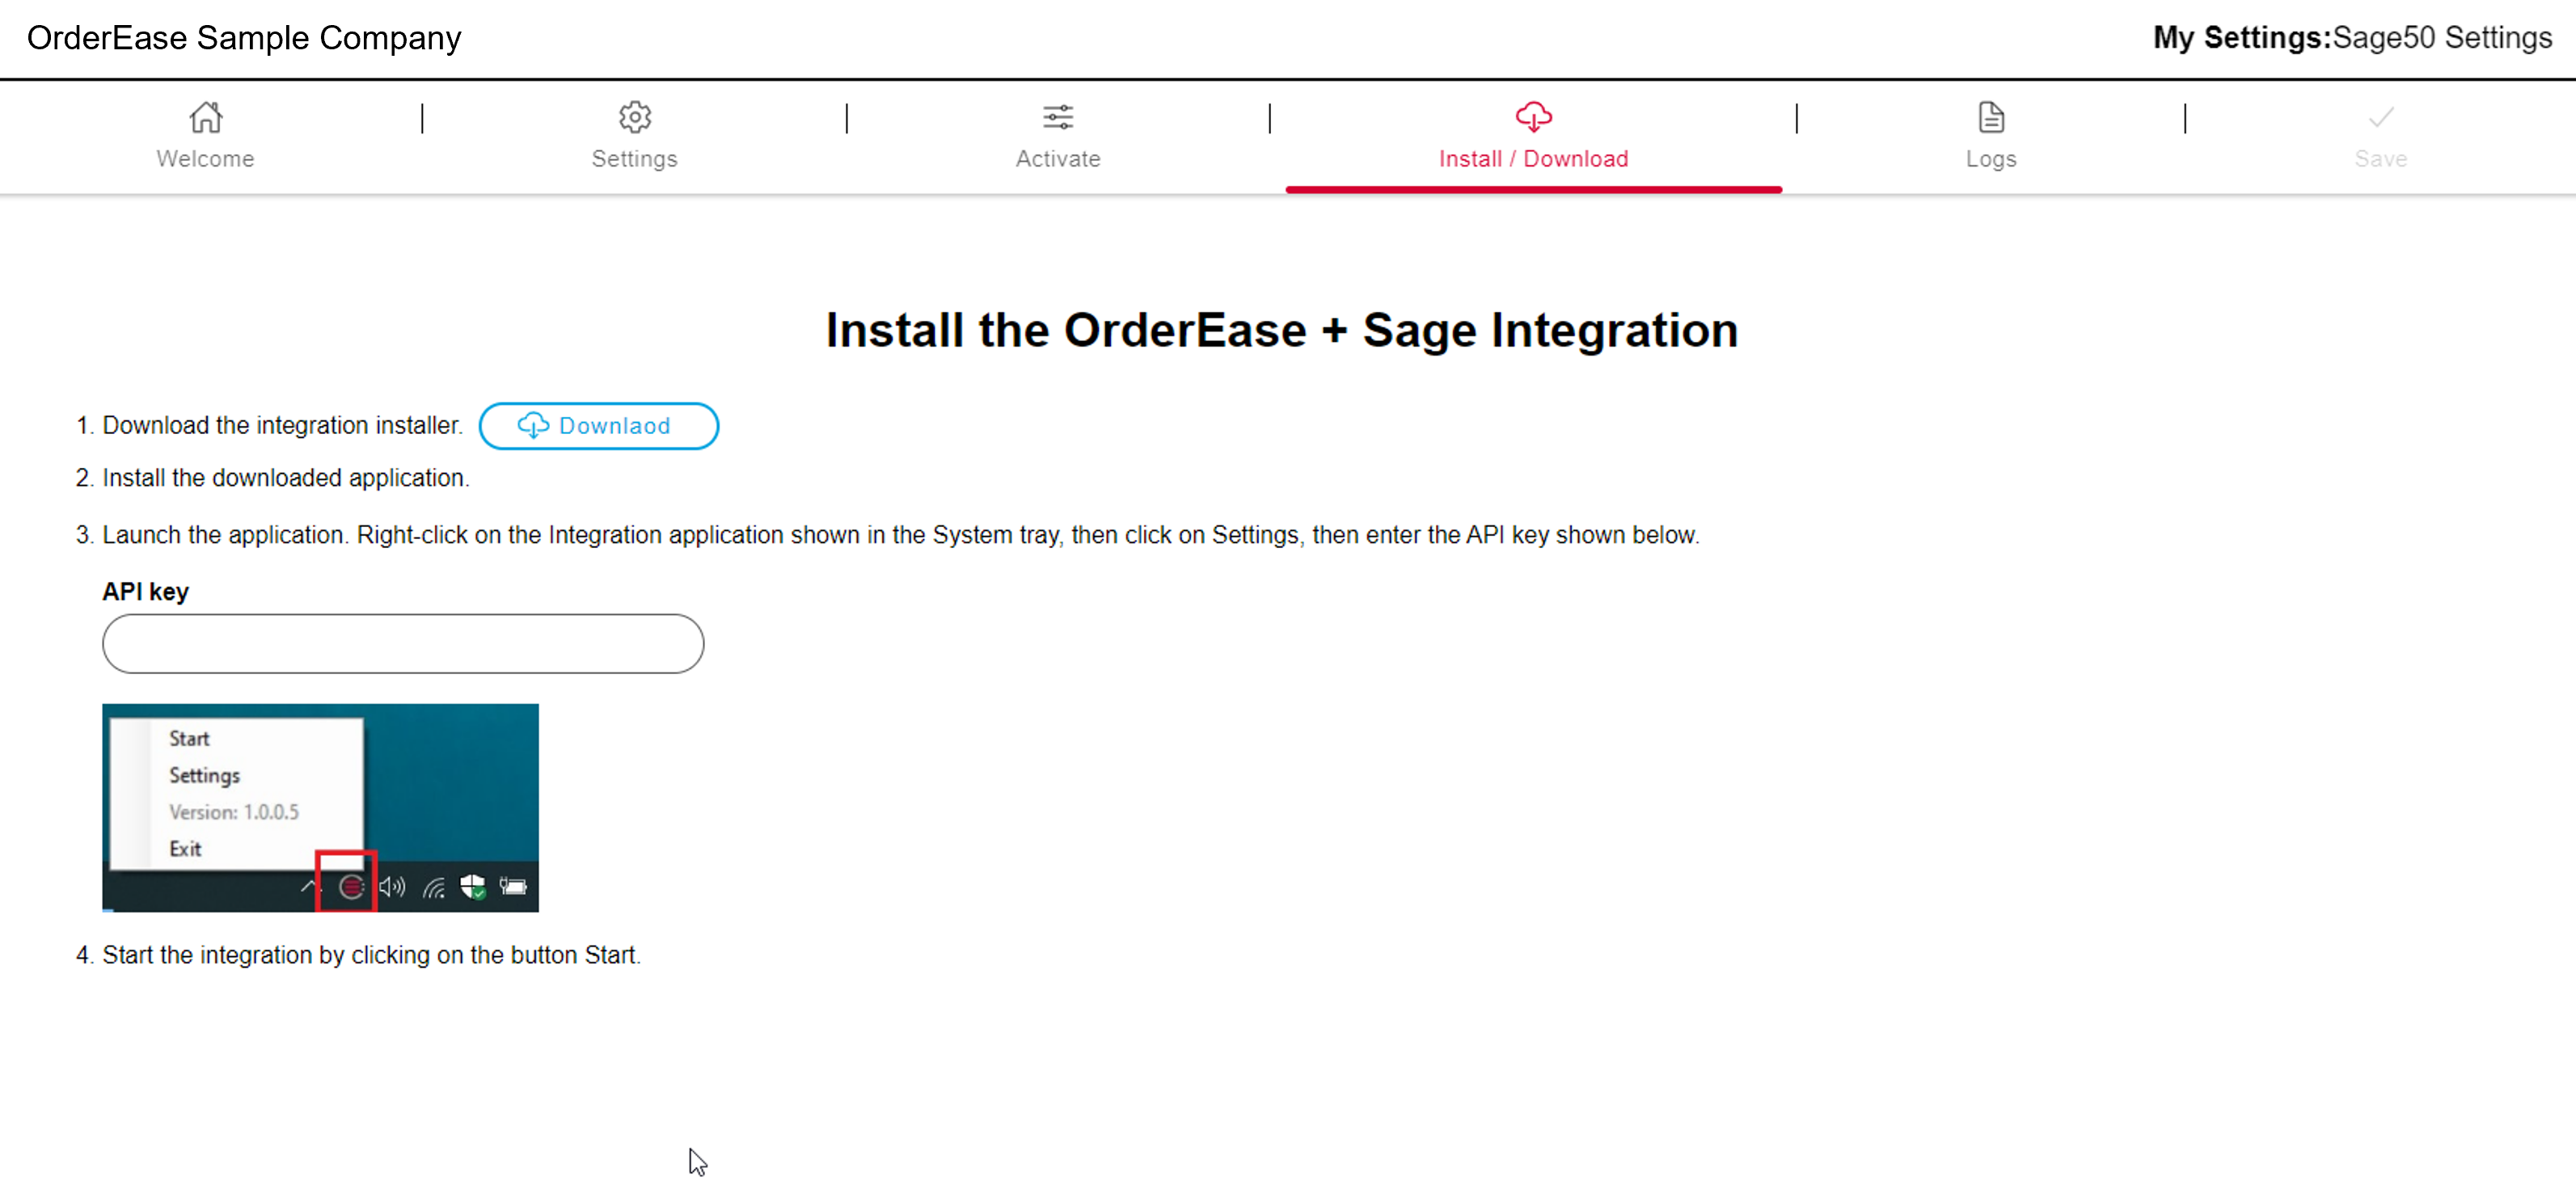 Sage integration download and install page